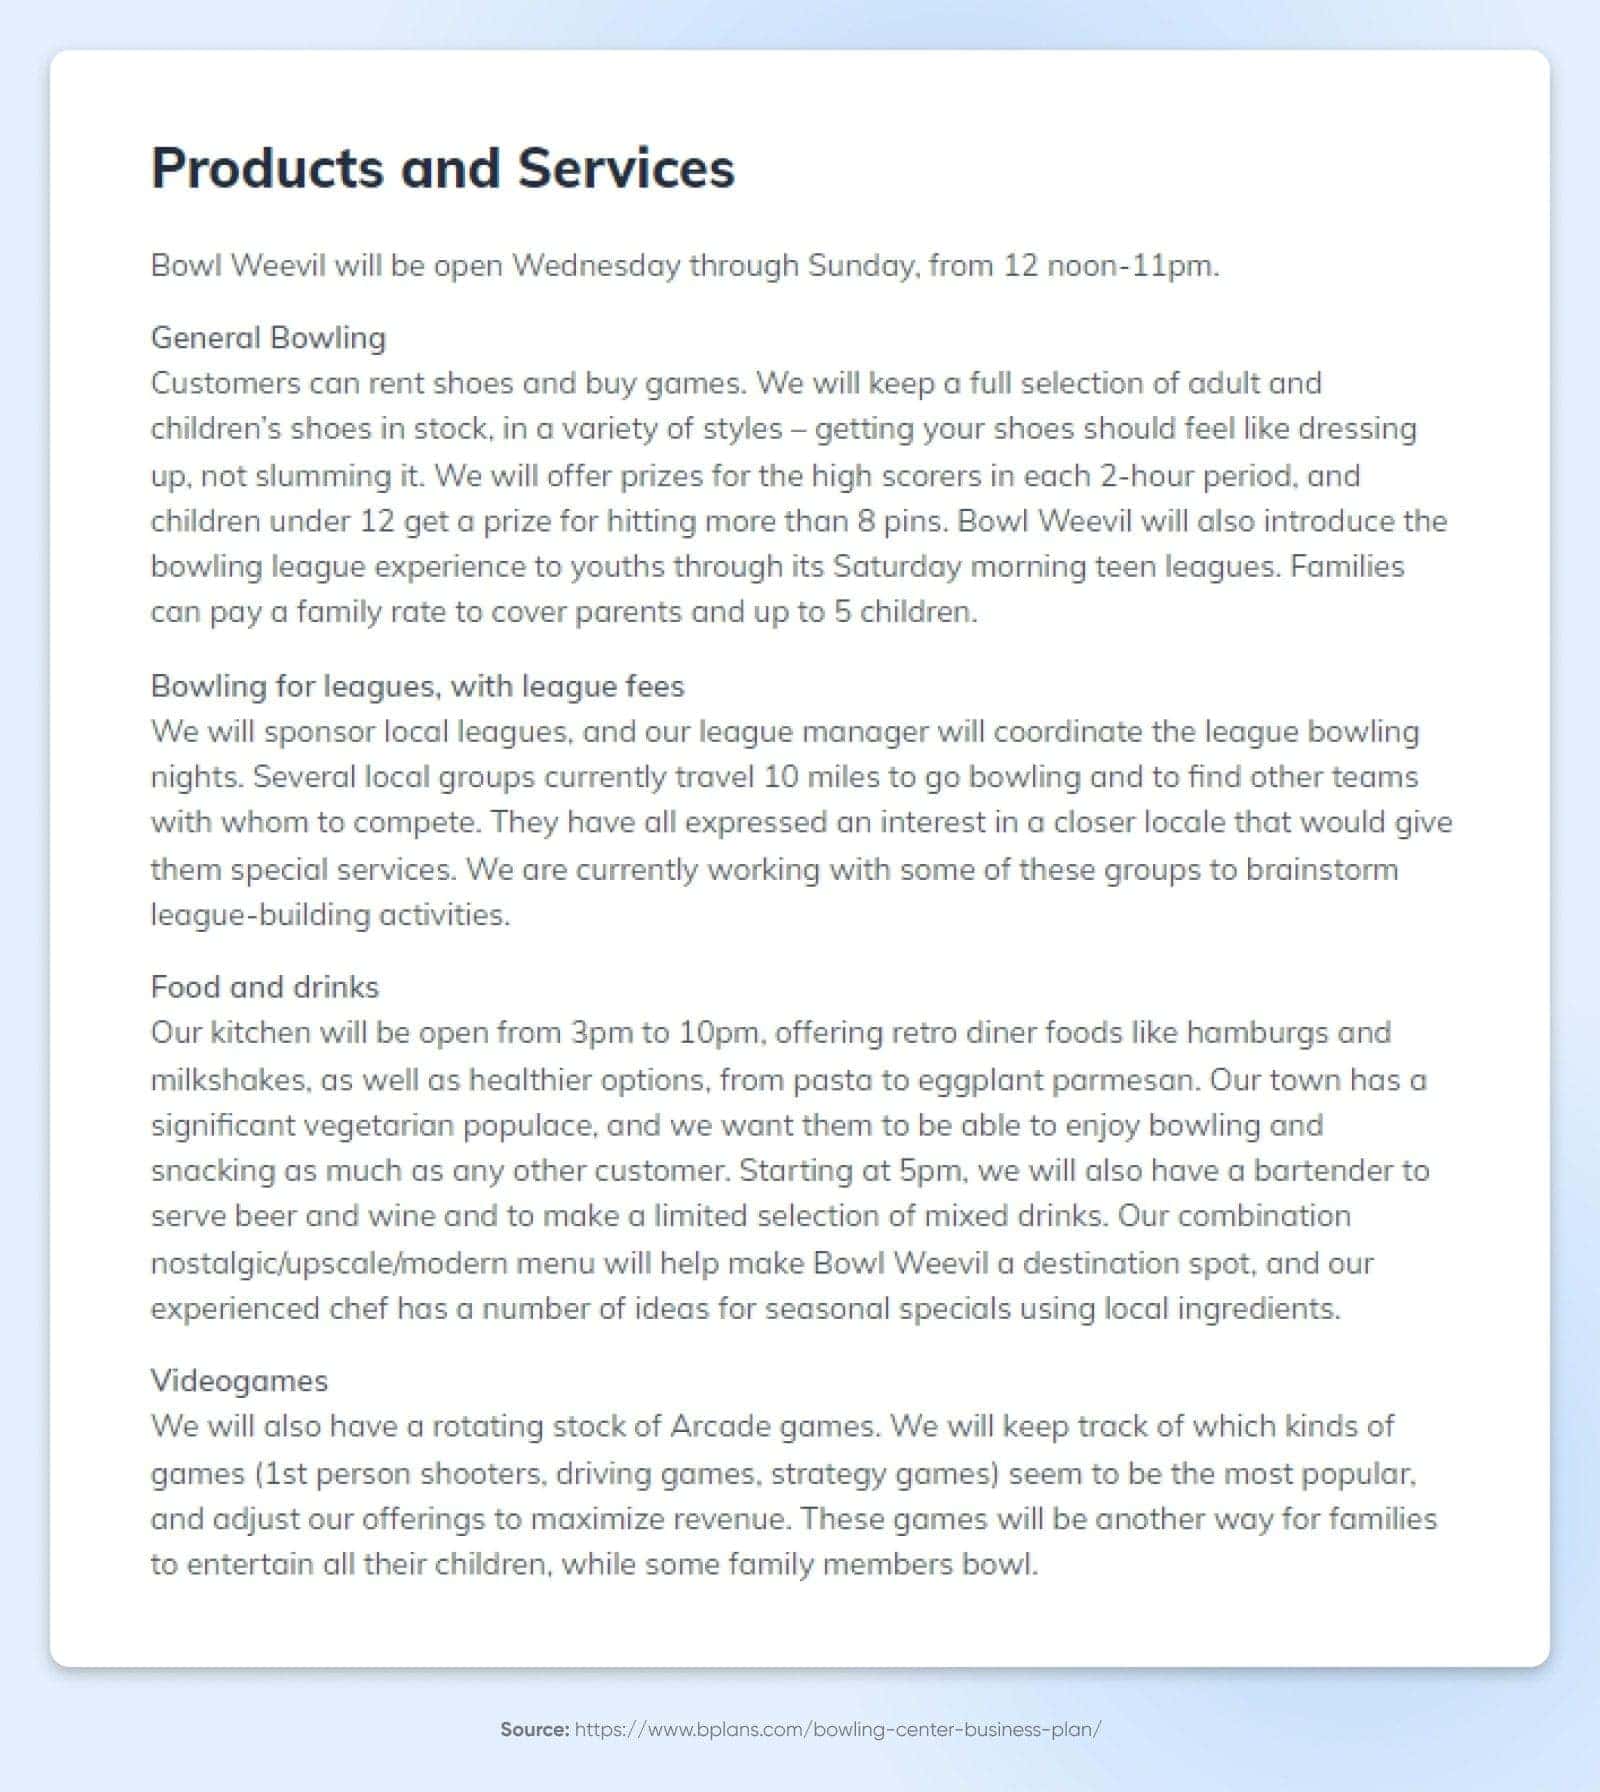 Bowl Weevil's Products and Services pages outlining their offerings including bowling for leagues and video games.